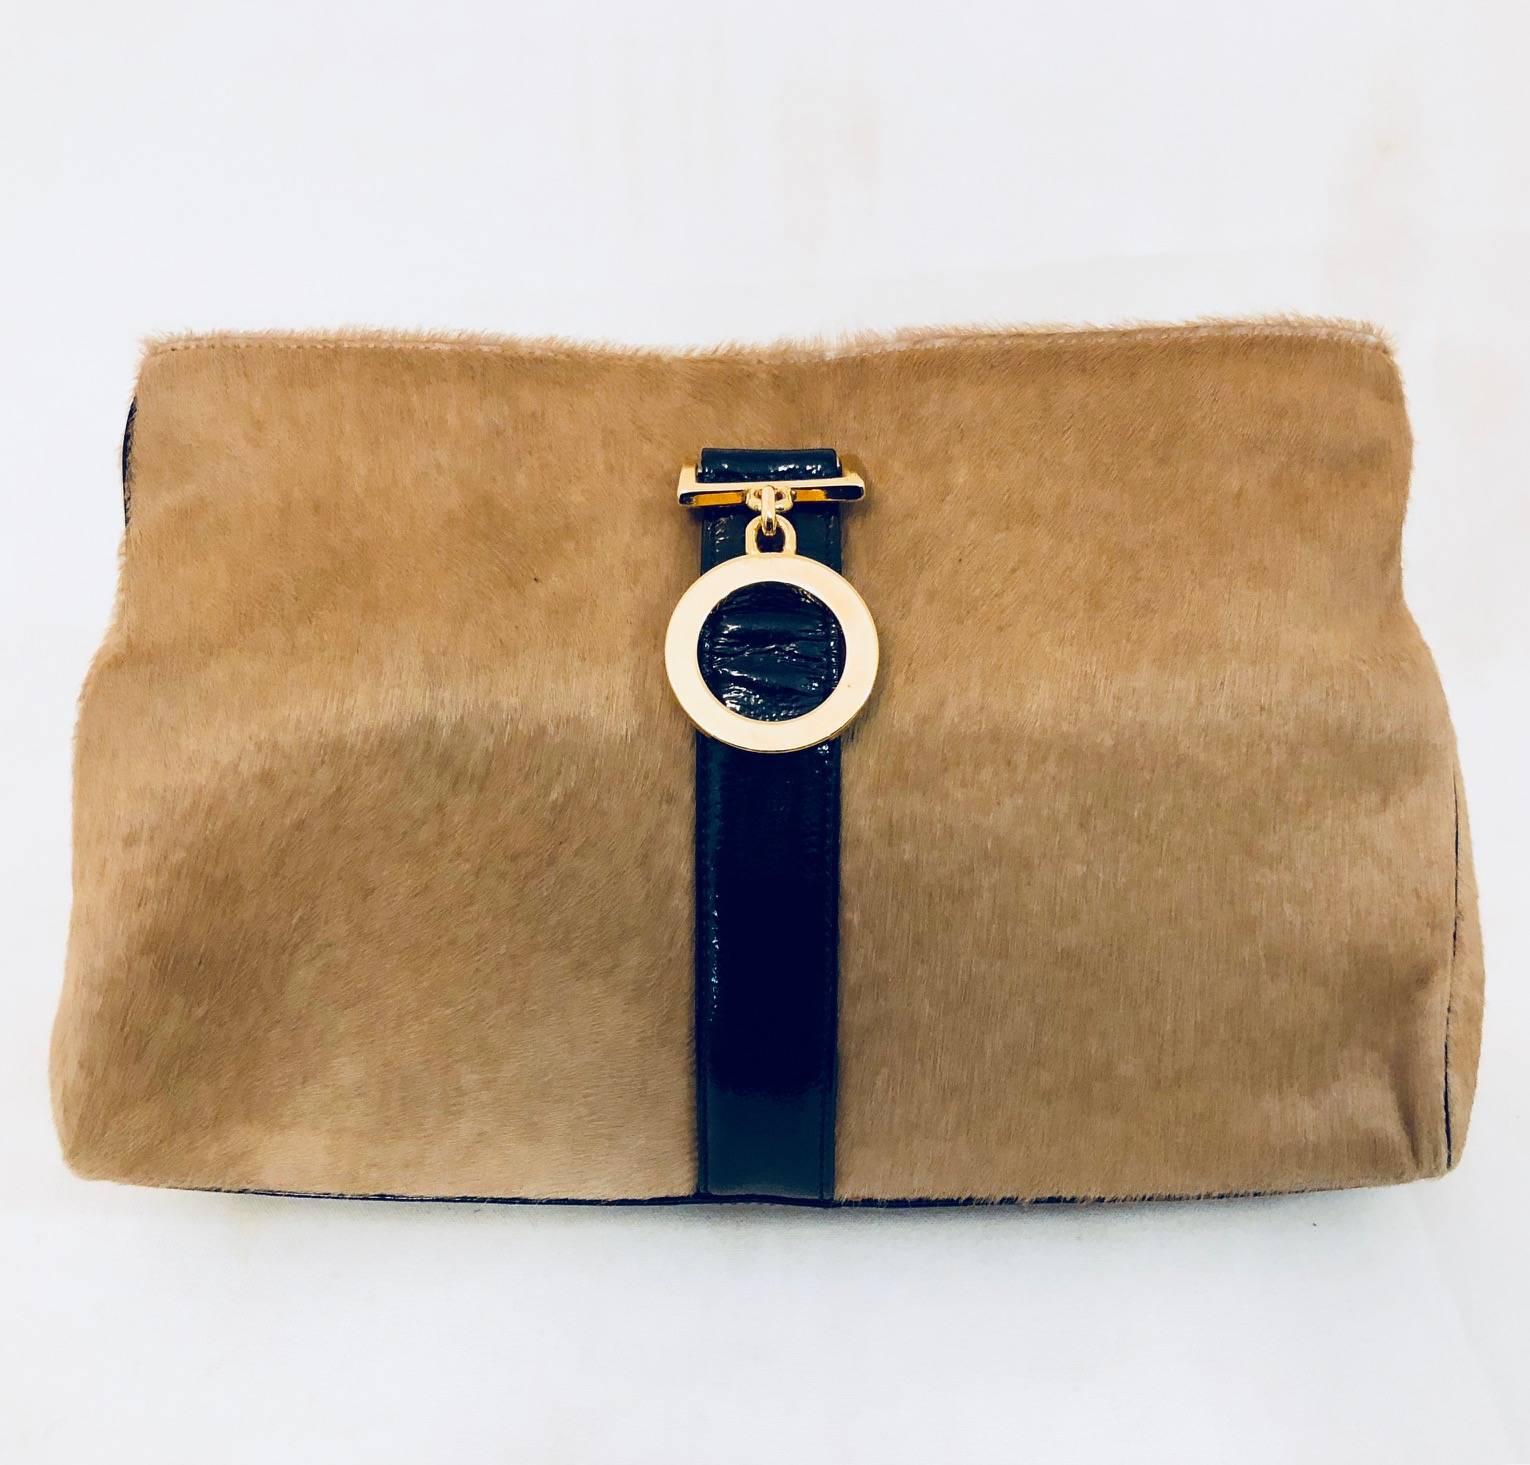 This innovative Gianni Versace clutch is made of beige pony hair and black patent leather trim.  Timeless, yet modern design, features a sophisticated, sleek shape that allows easy access.  To close, just roll the top over and close the bag with the